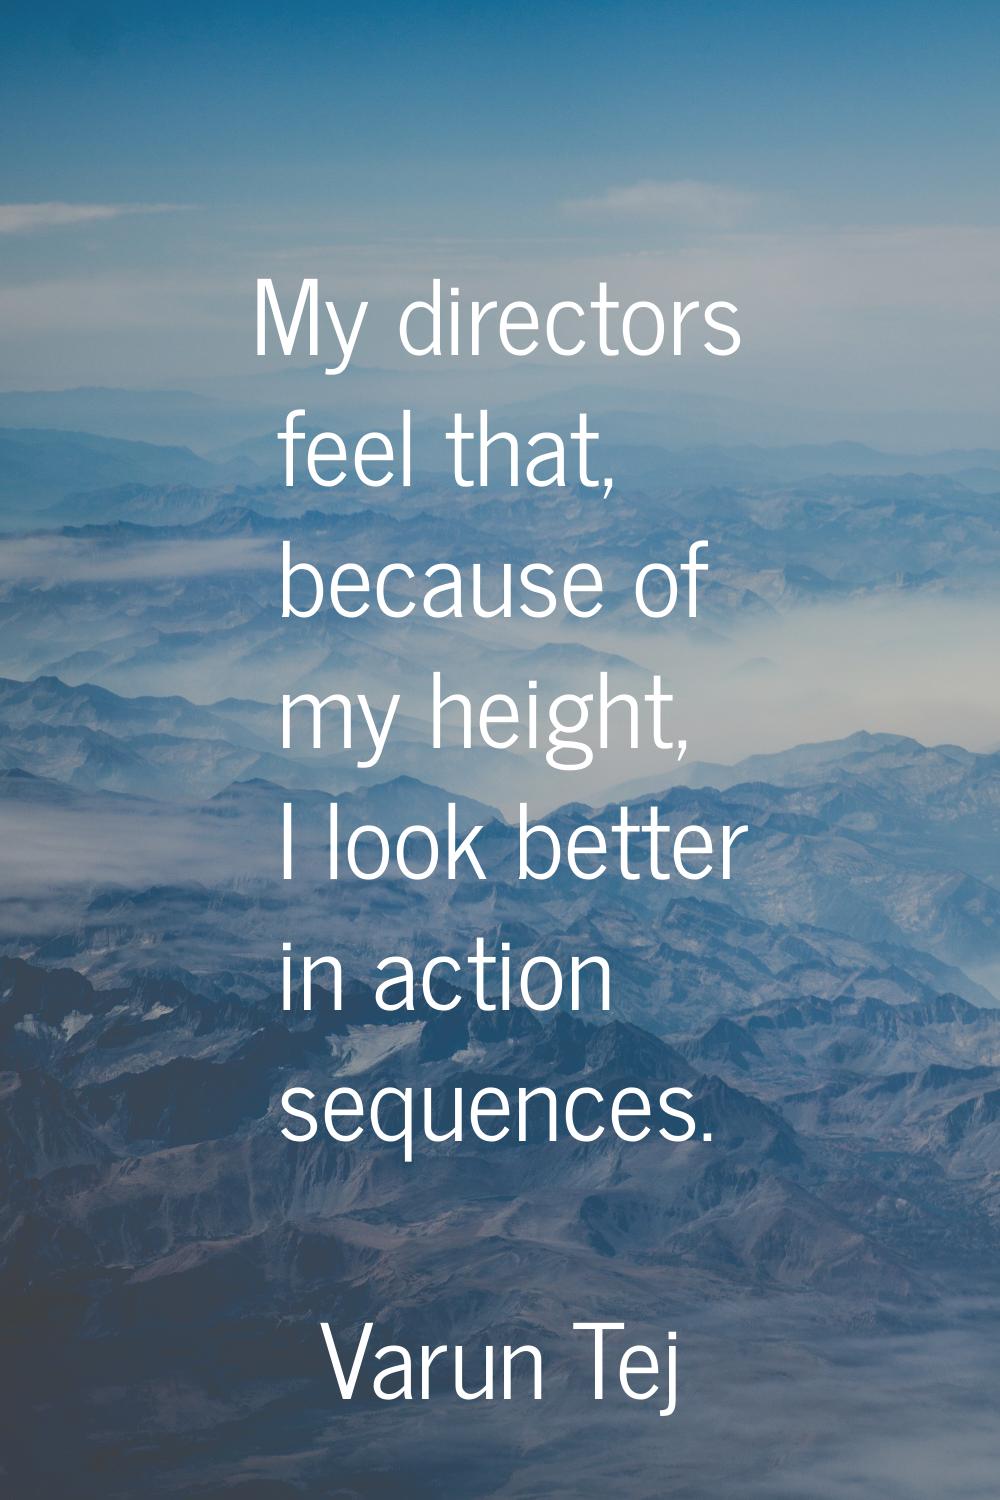 My directors feel that, because of my height, I look better in action sequences.